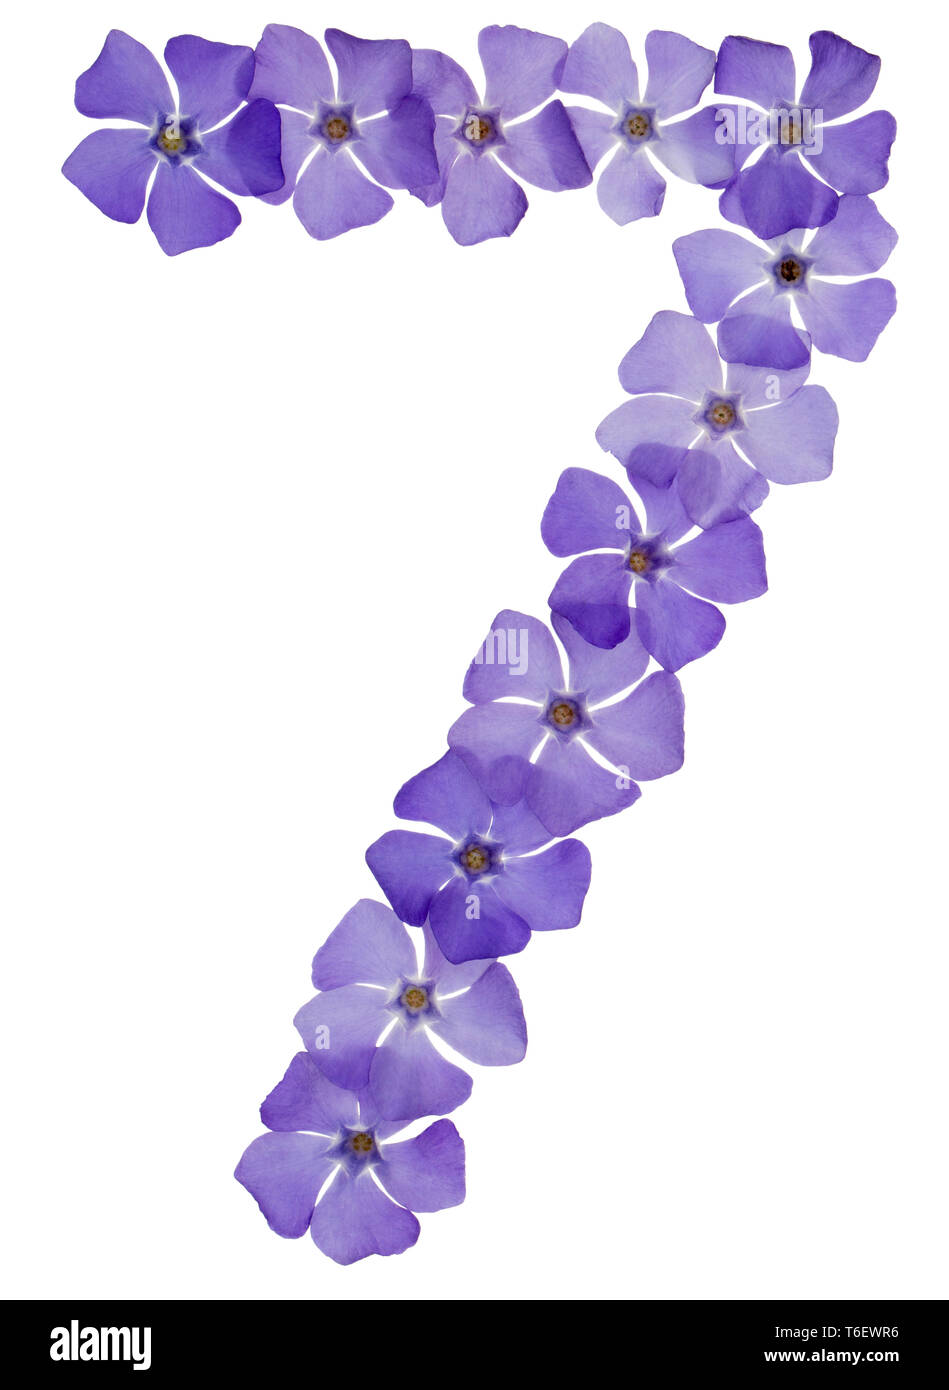 Arabic numeral 77, seventy seven, from blue forget-me-not flowers Stock  Photo - Alamy